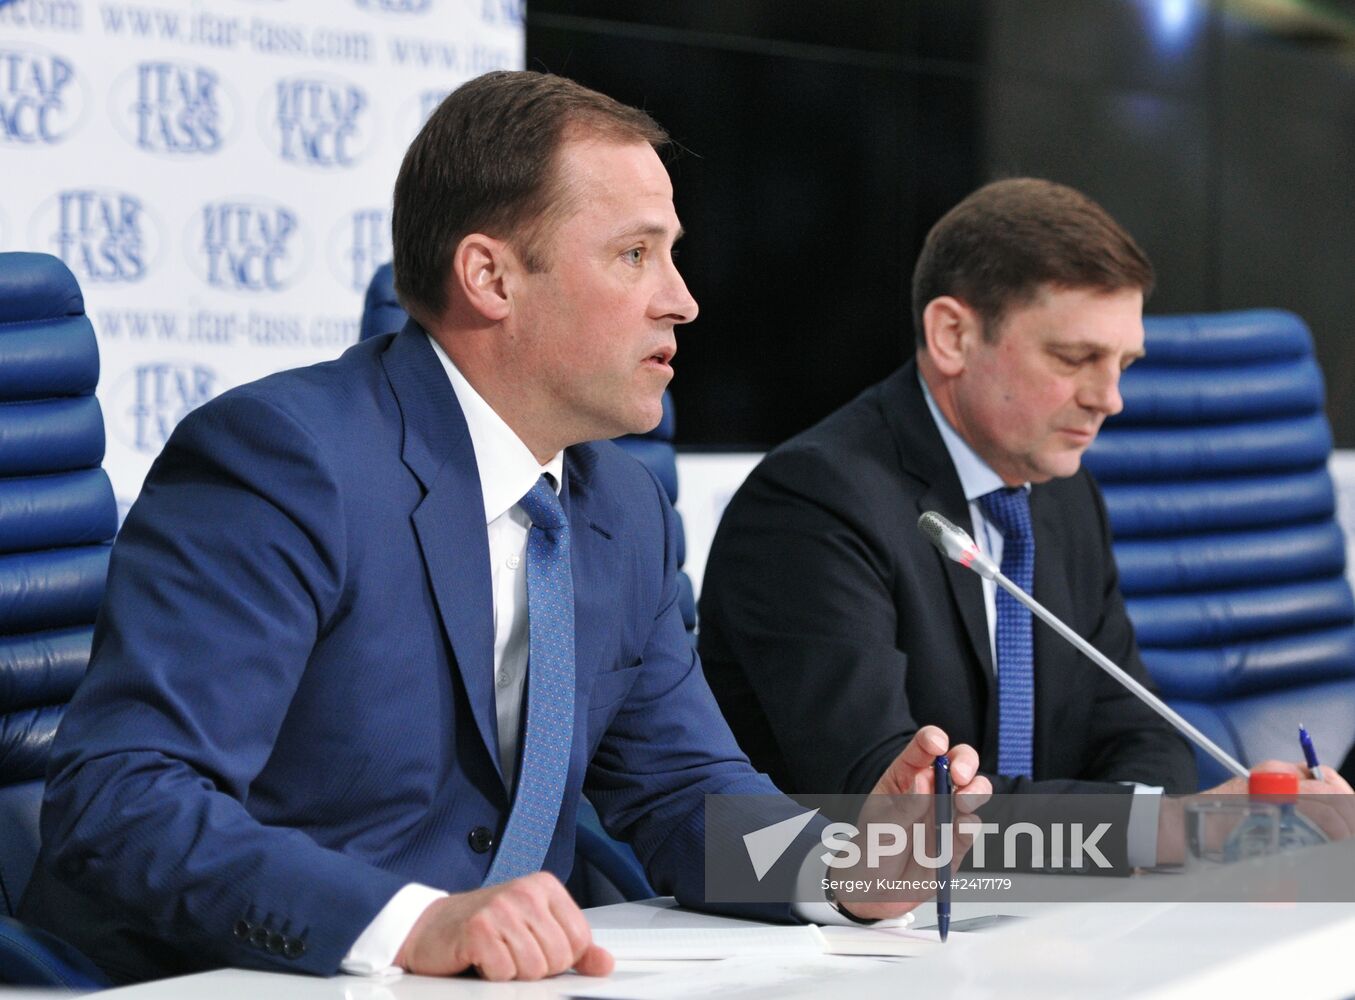 Press conference by Russia's Space Agency and United Rocket and Space Corporation managers